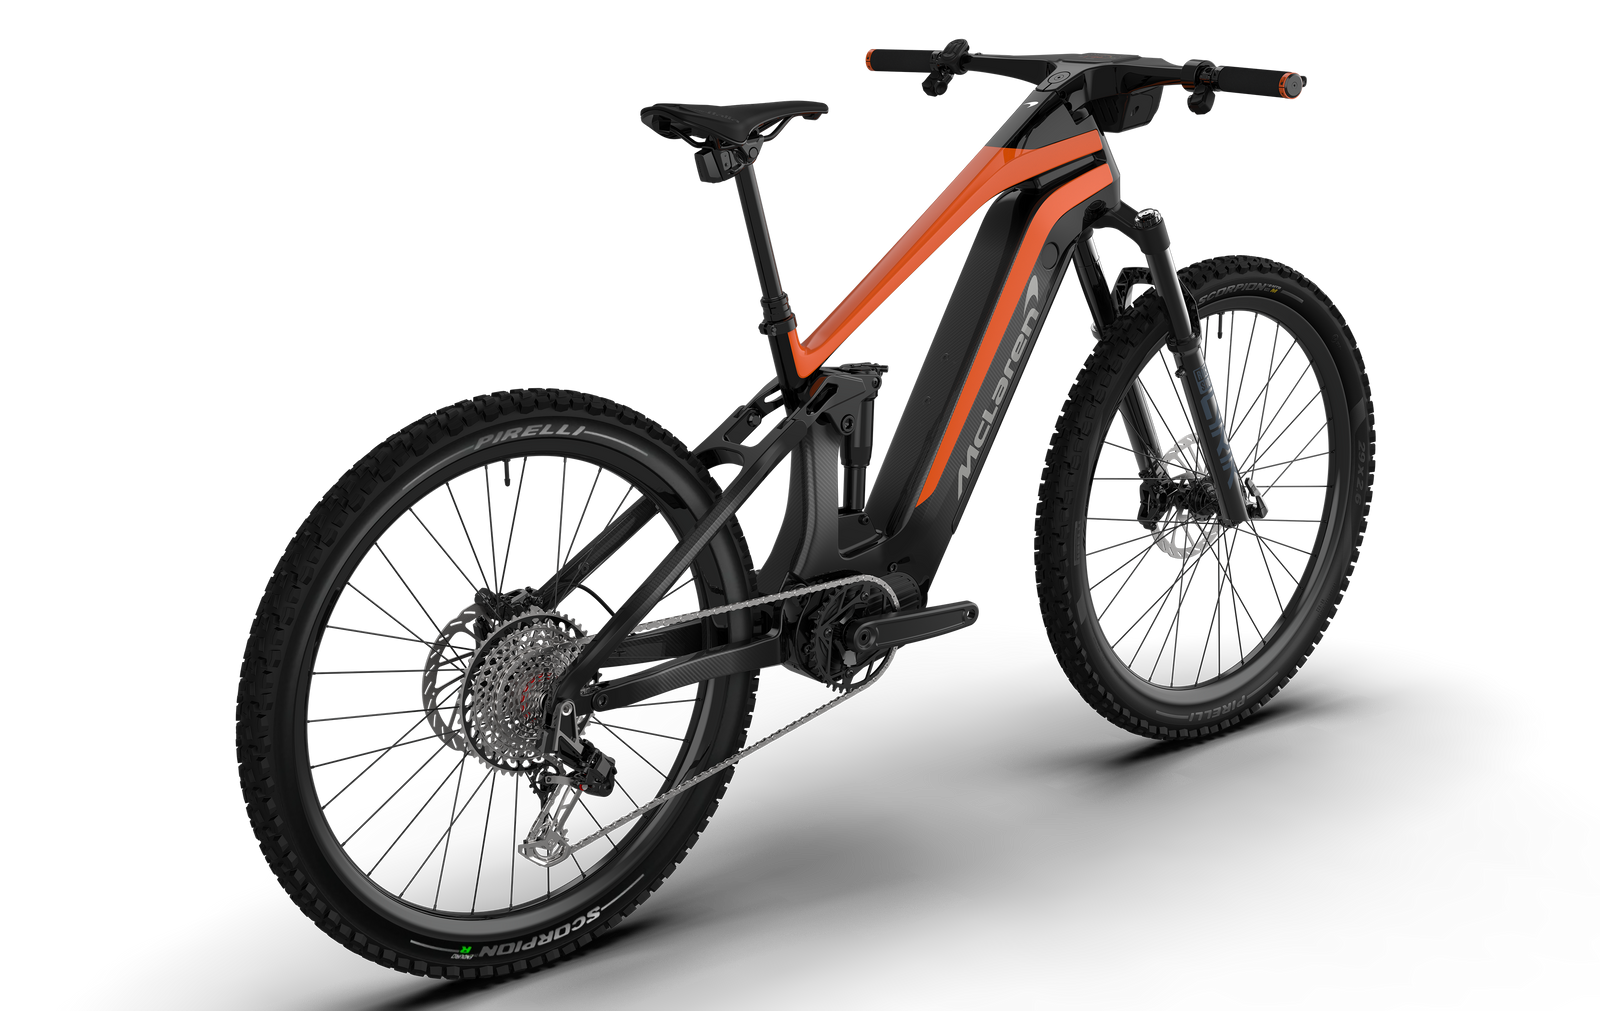 Three-quarter angle view from the rear of the carbon McLaren full suspension eMTB featuring 29 inch front wheel and 27.5 inch rear wheel, SRAM Eagle drivetrain and integrated cockpit with high-definition digital display.